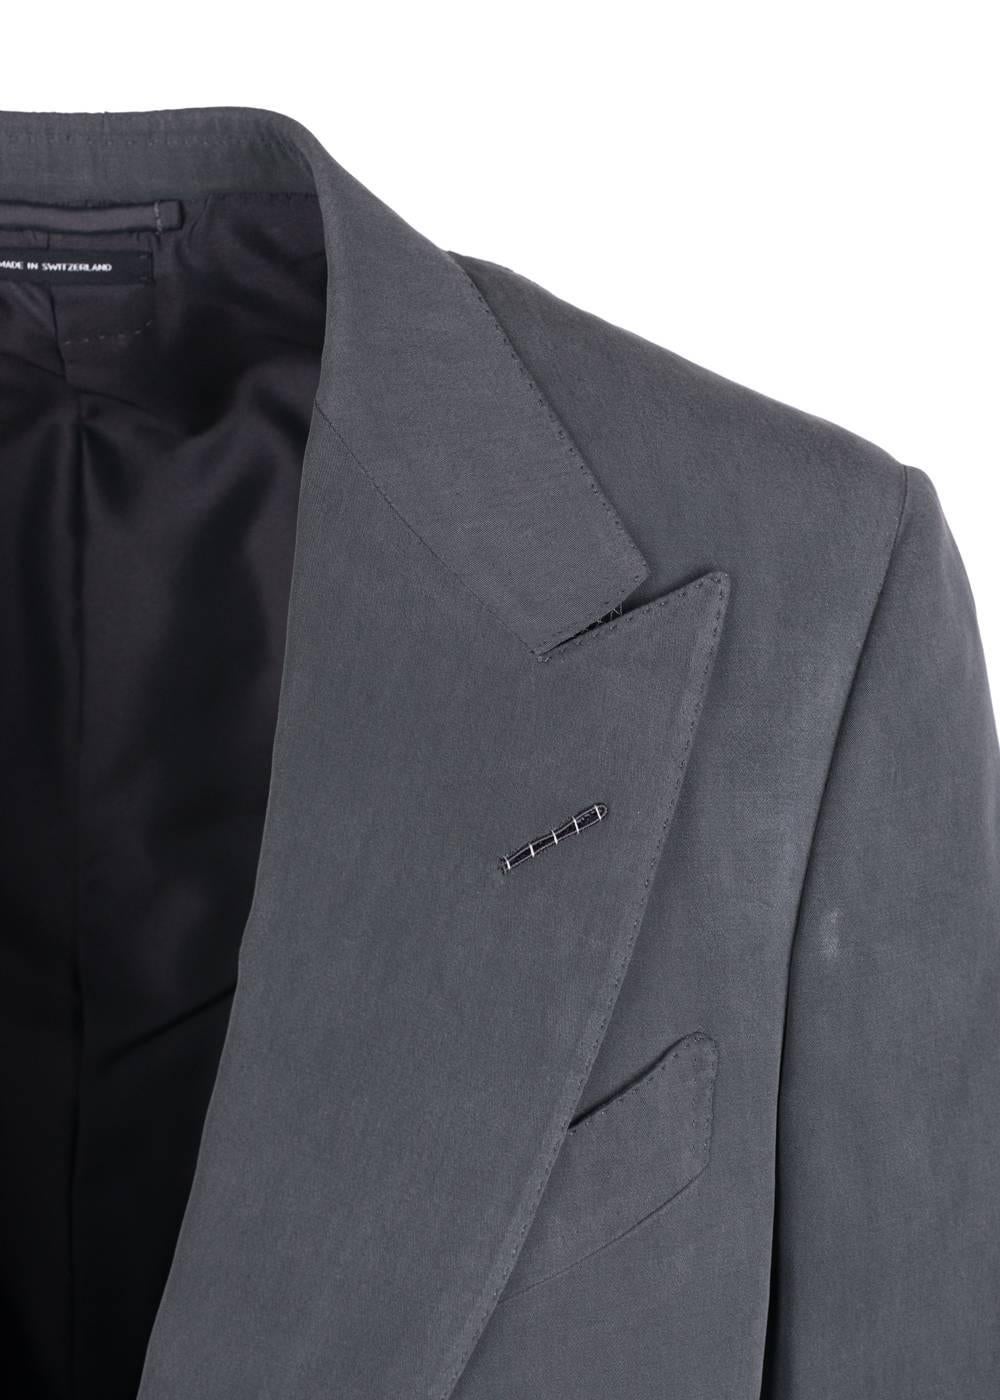 Tom Ford Slate Grey 100% Silk Shelton 2PC Suit In New Condition For Sale In Brooklyn, NY